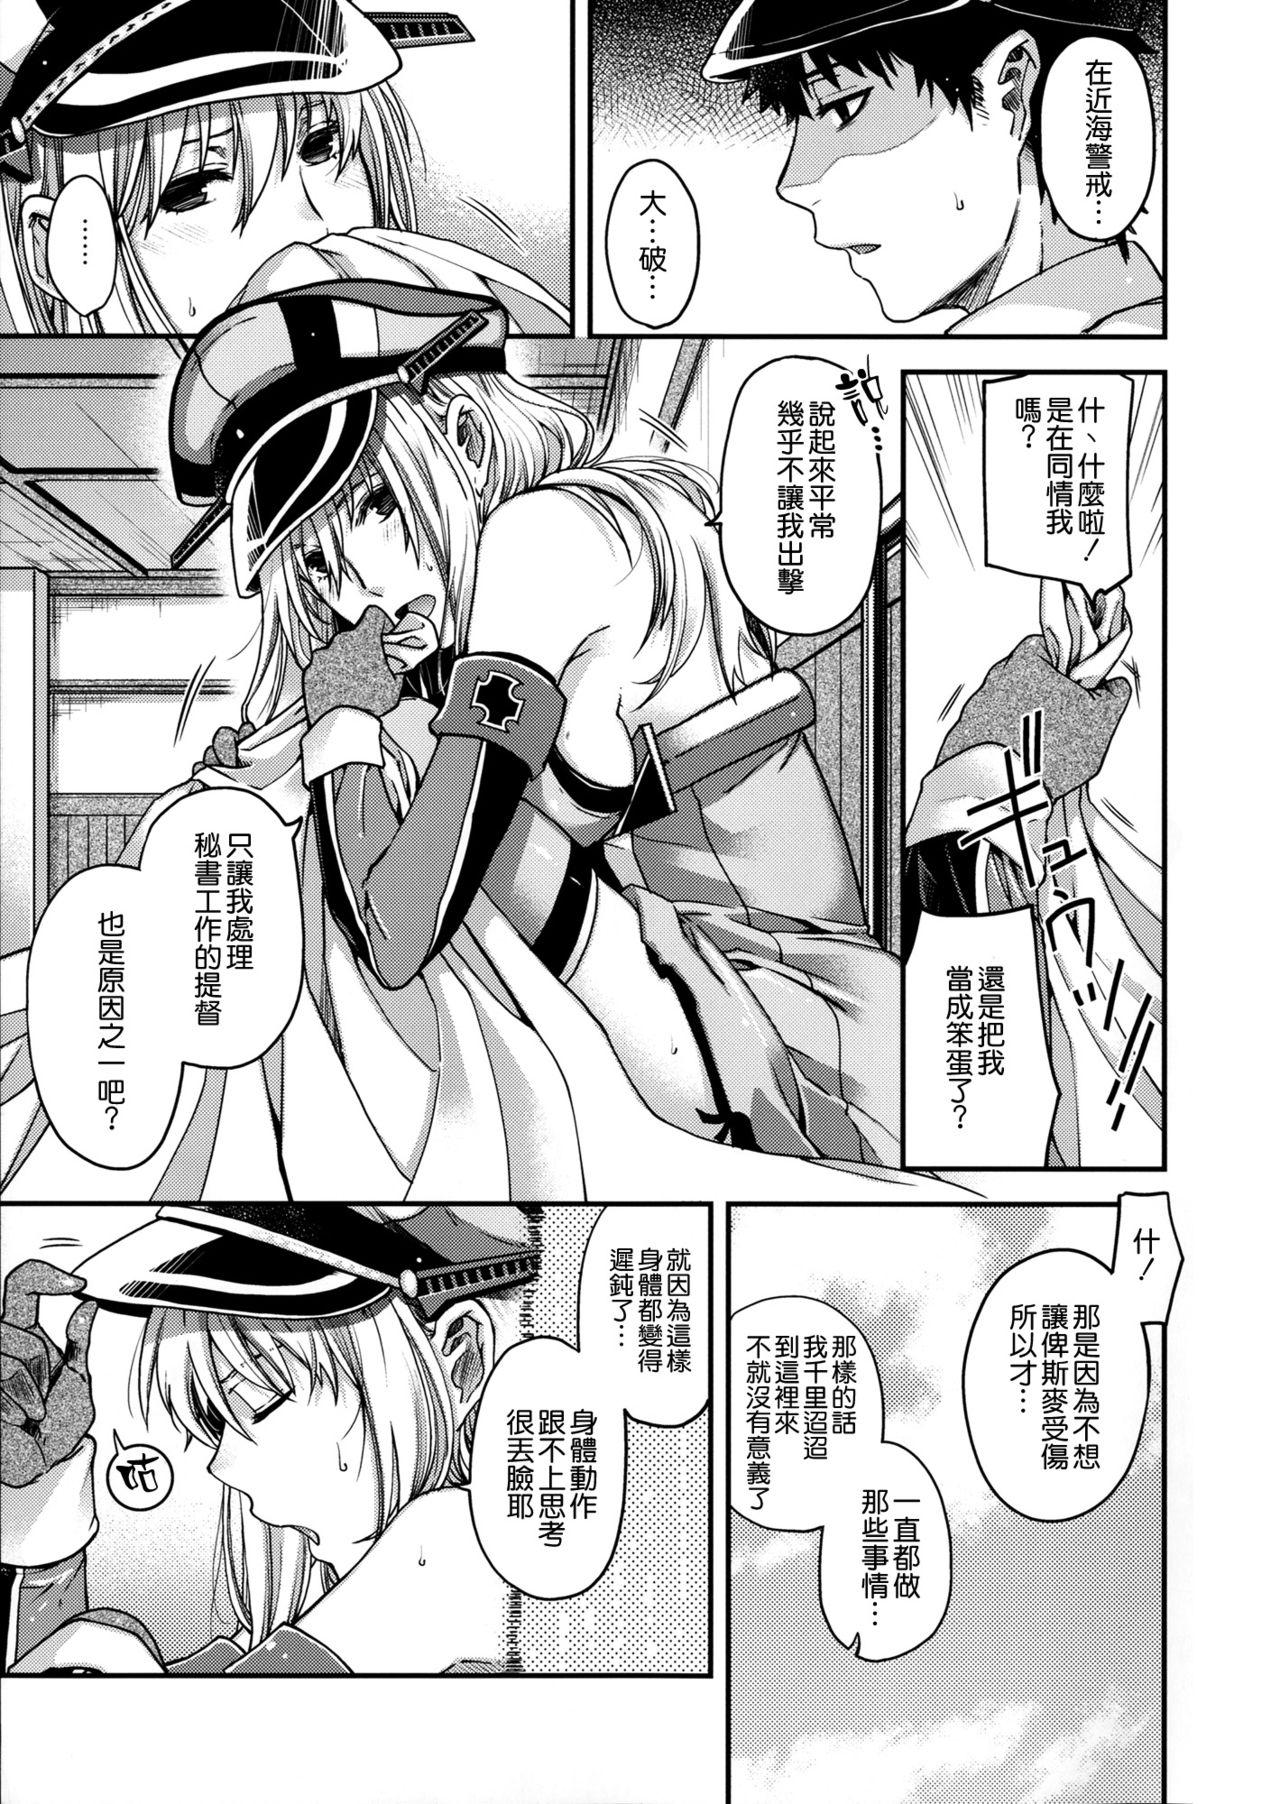 Special Locations Admiral!!! + Omake Paper - Kantai collection Semen - Page 9